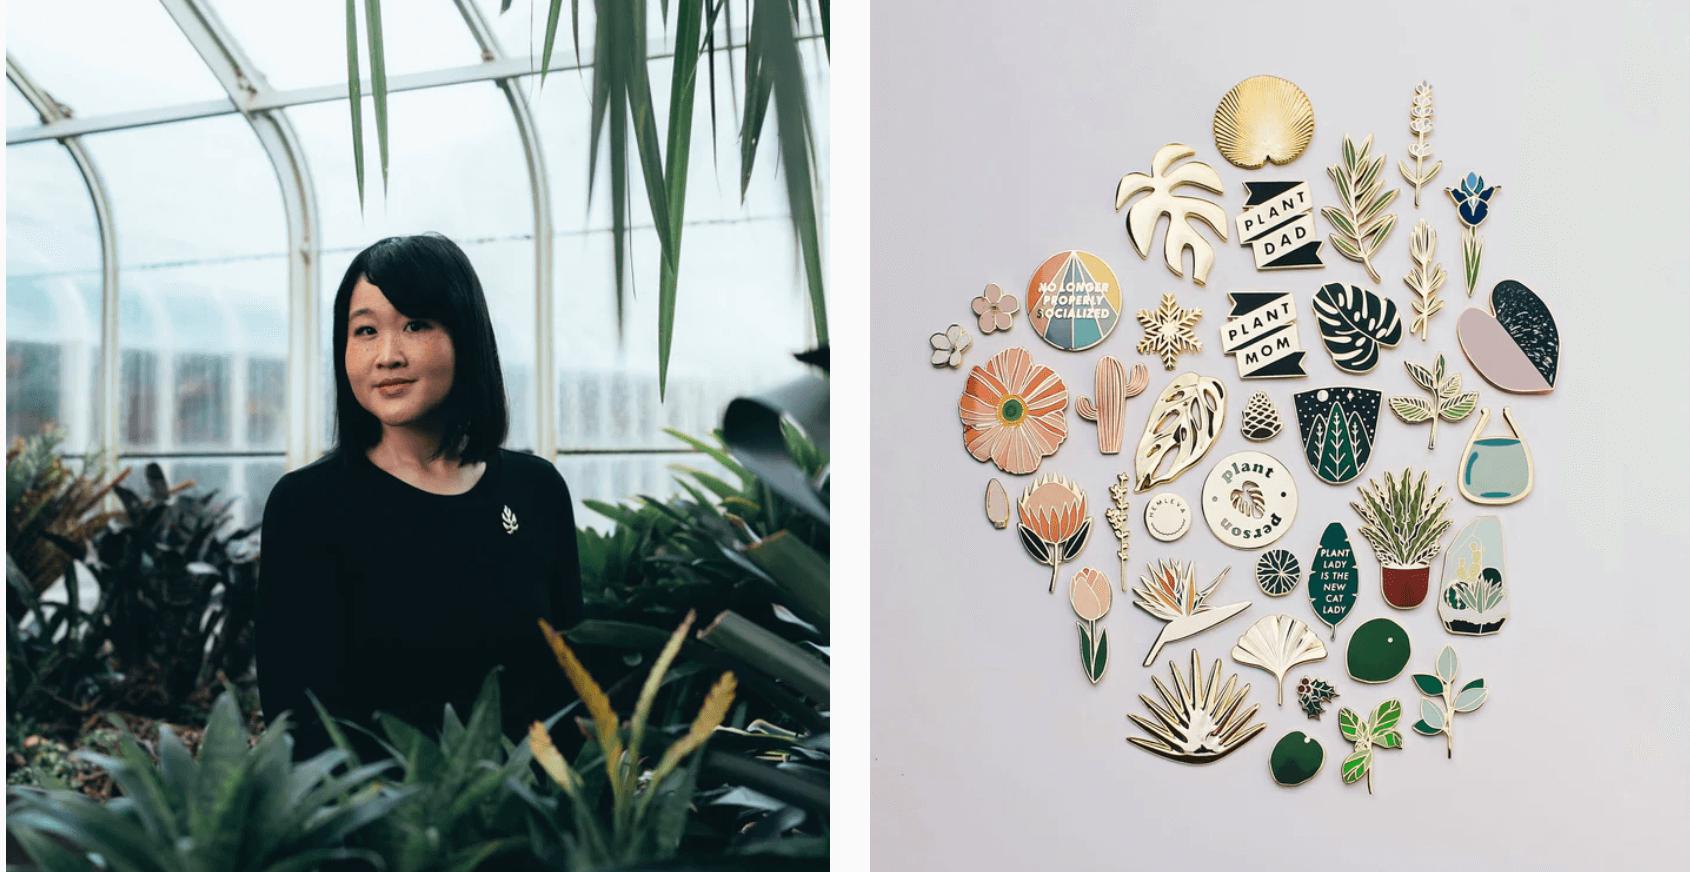 Hemleva owner Samantha Leung and her collection of nature inspired pins displayed